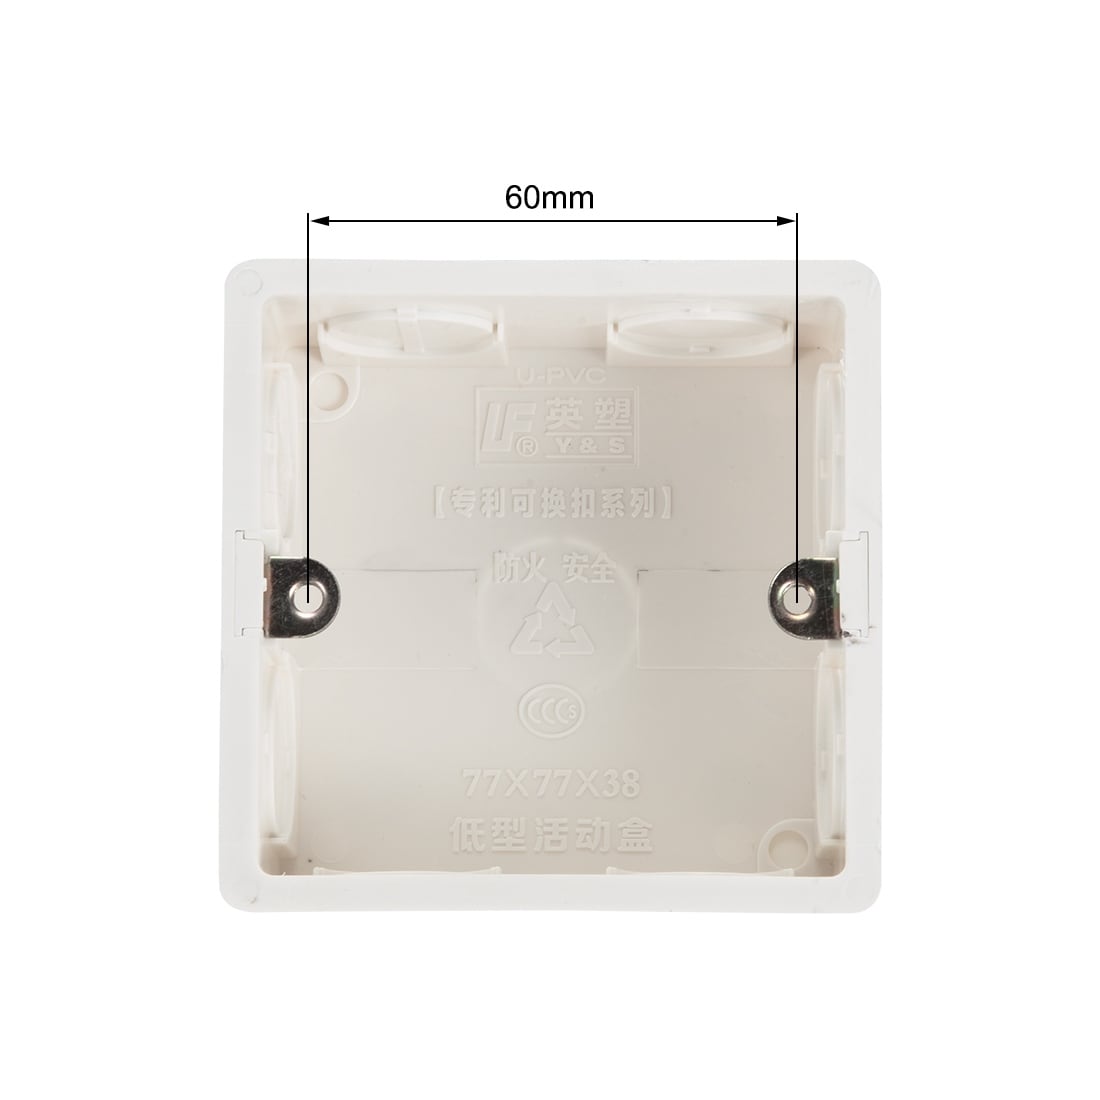 Details about   Wall Switch Box Deep Case Recessed Mount 86 Type Single Gang White 87*87*42 2pcs 